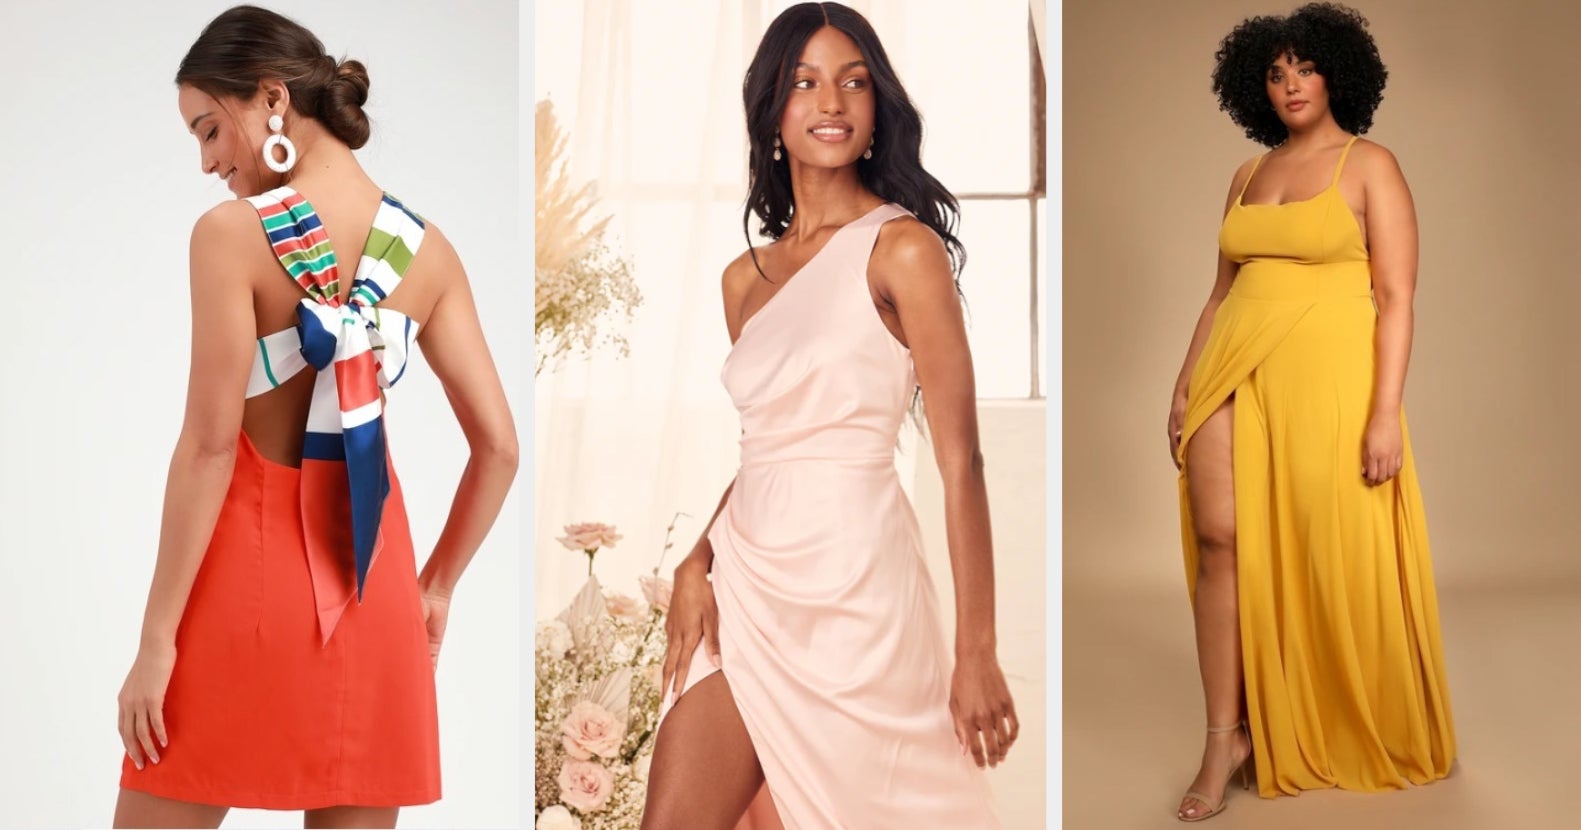 20 Stylish Dresses From Lulus To Wear To A Wedding